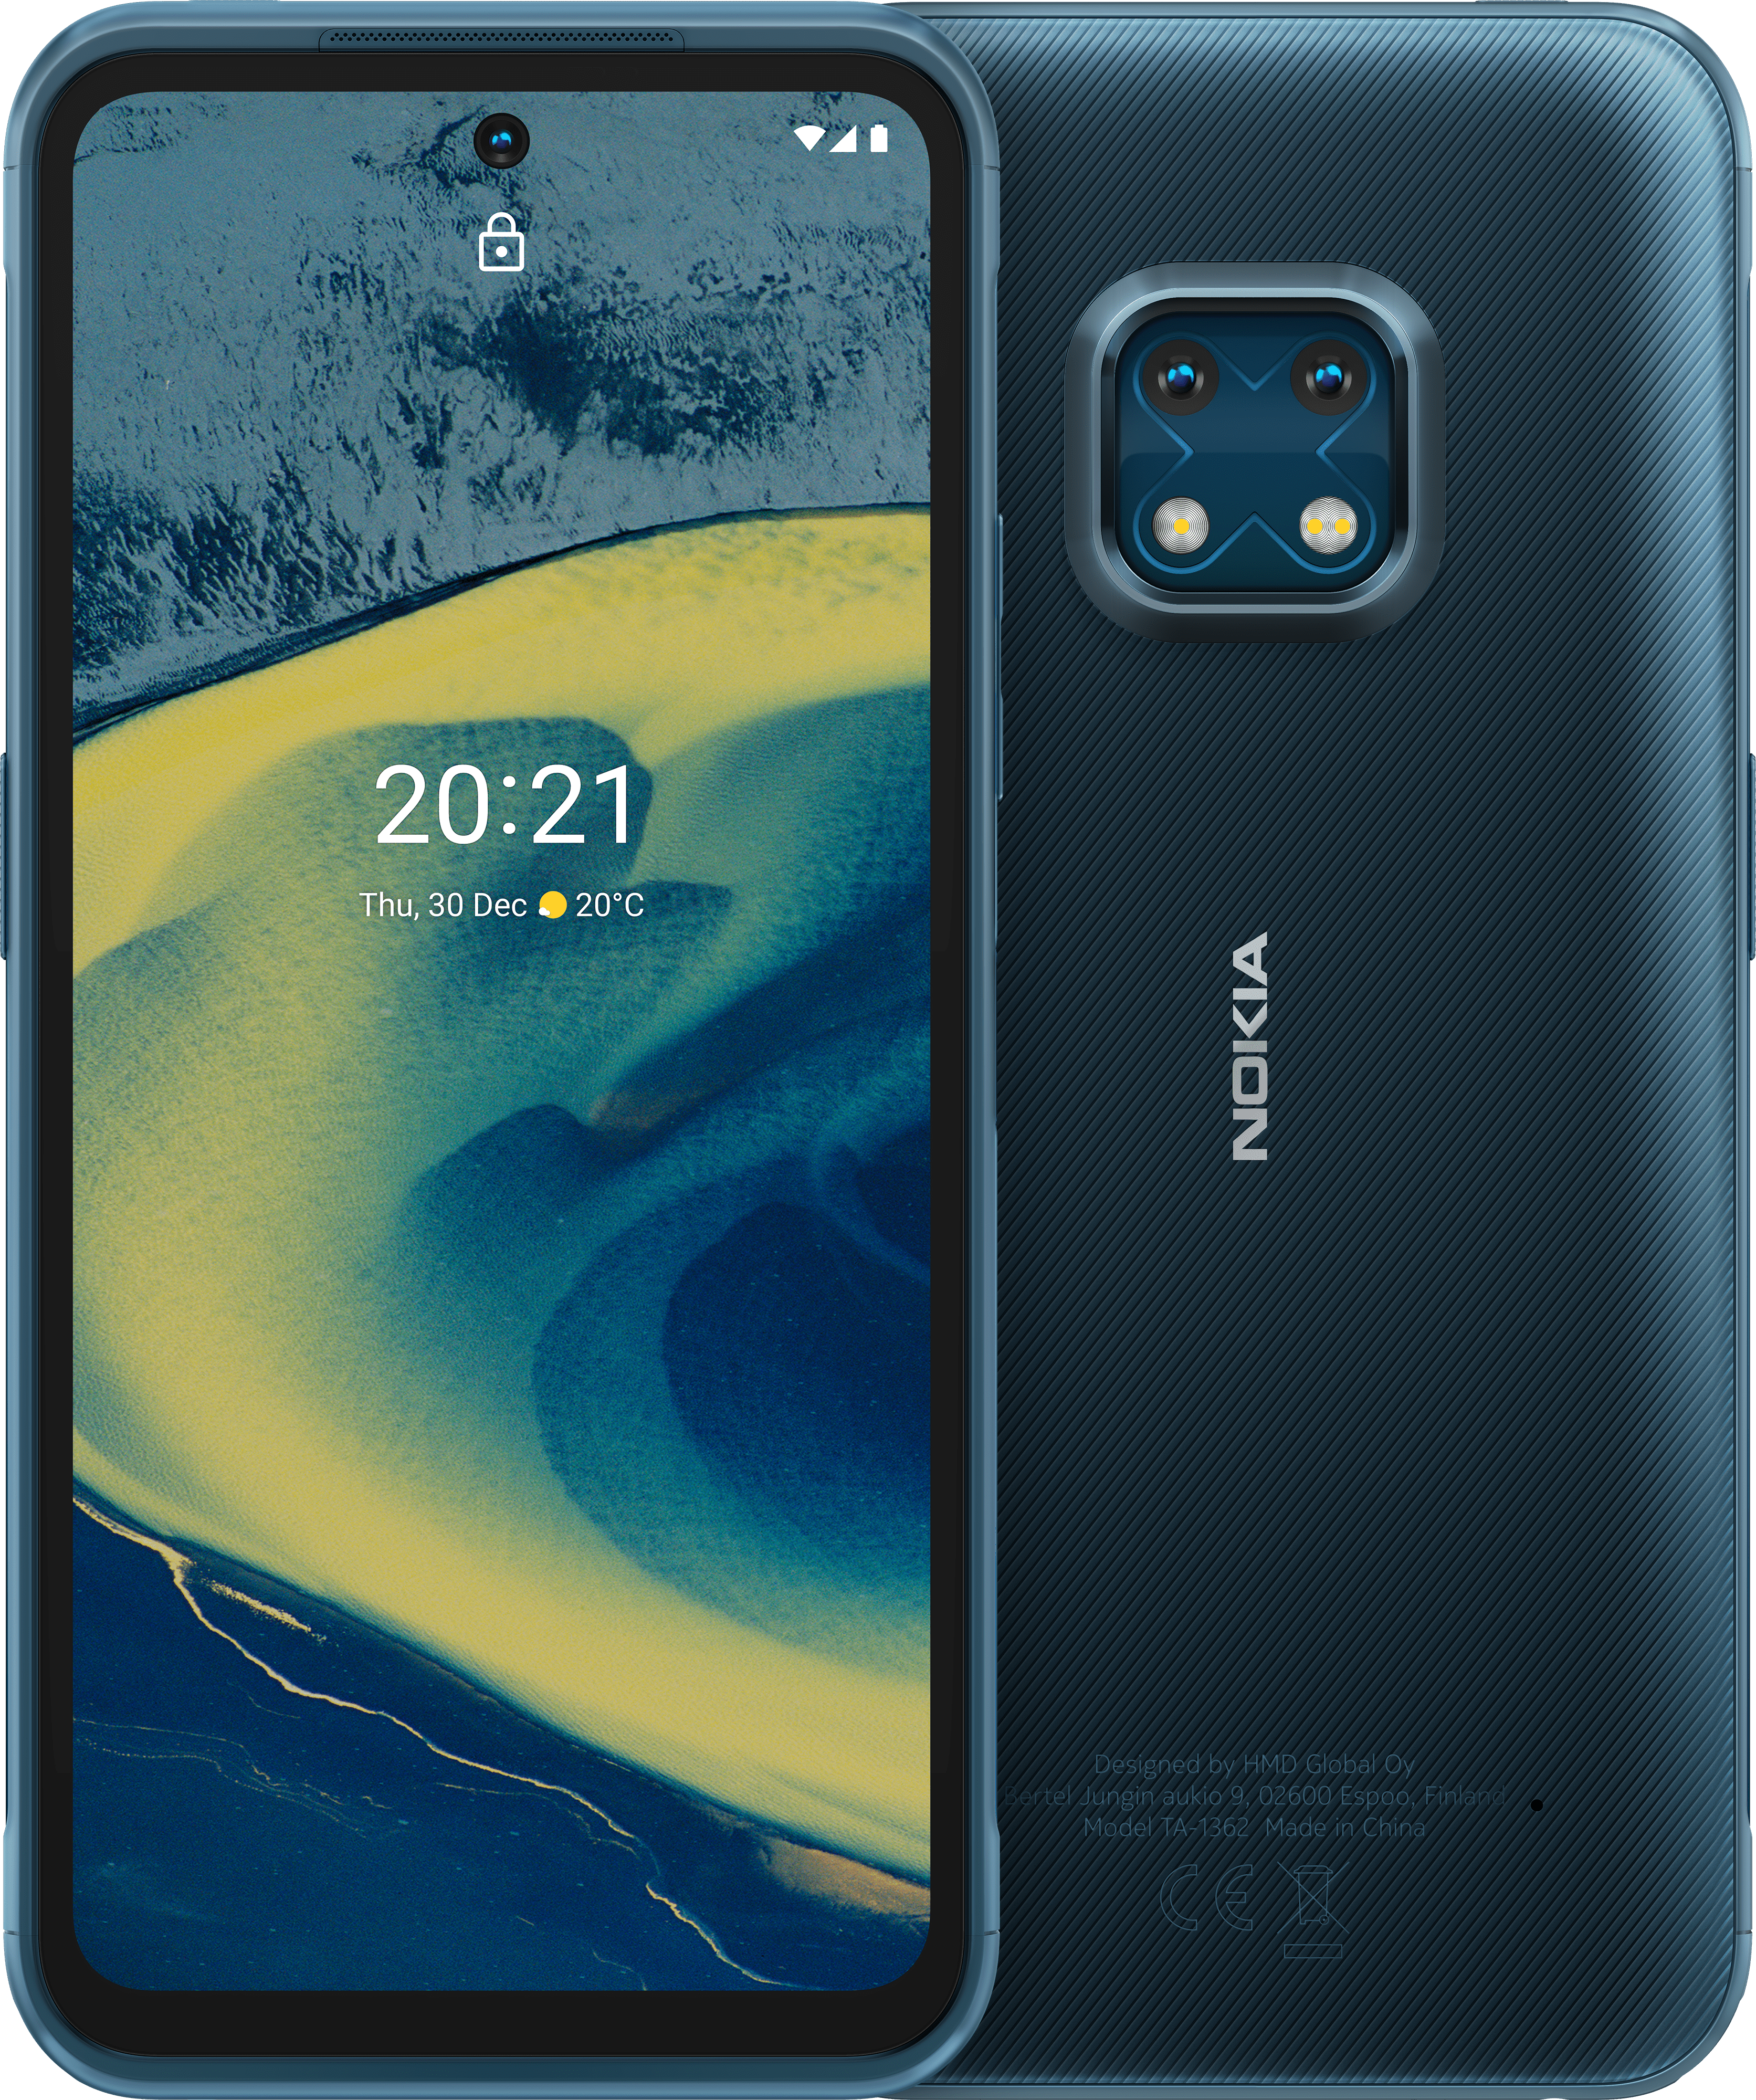 The latest Nokia phones and accessories